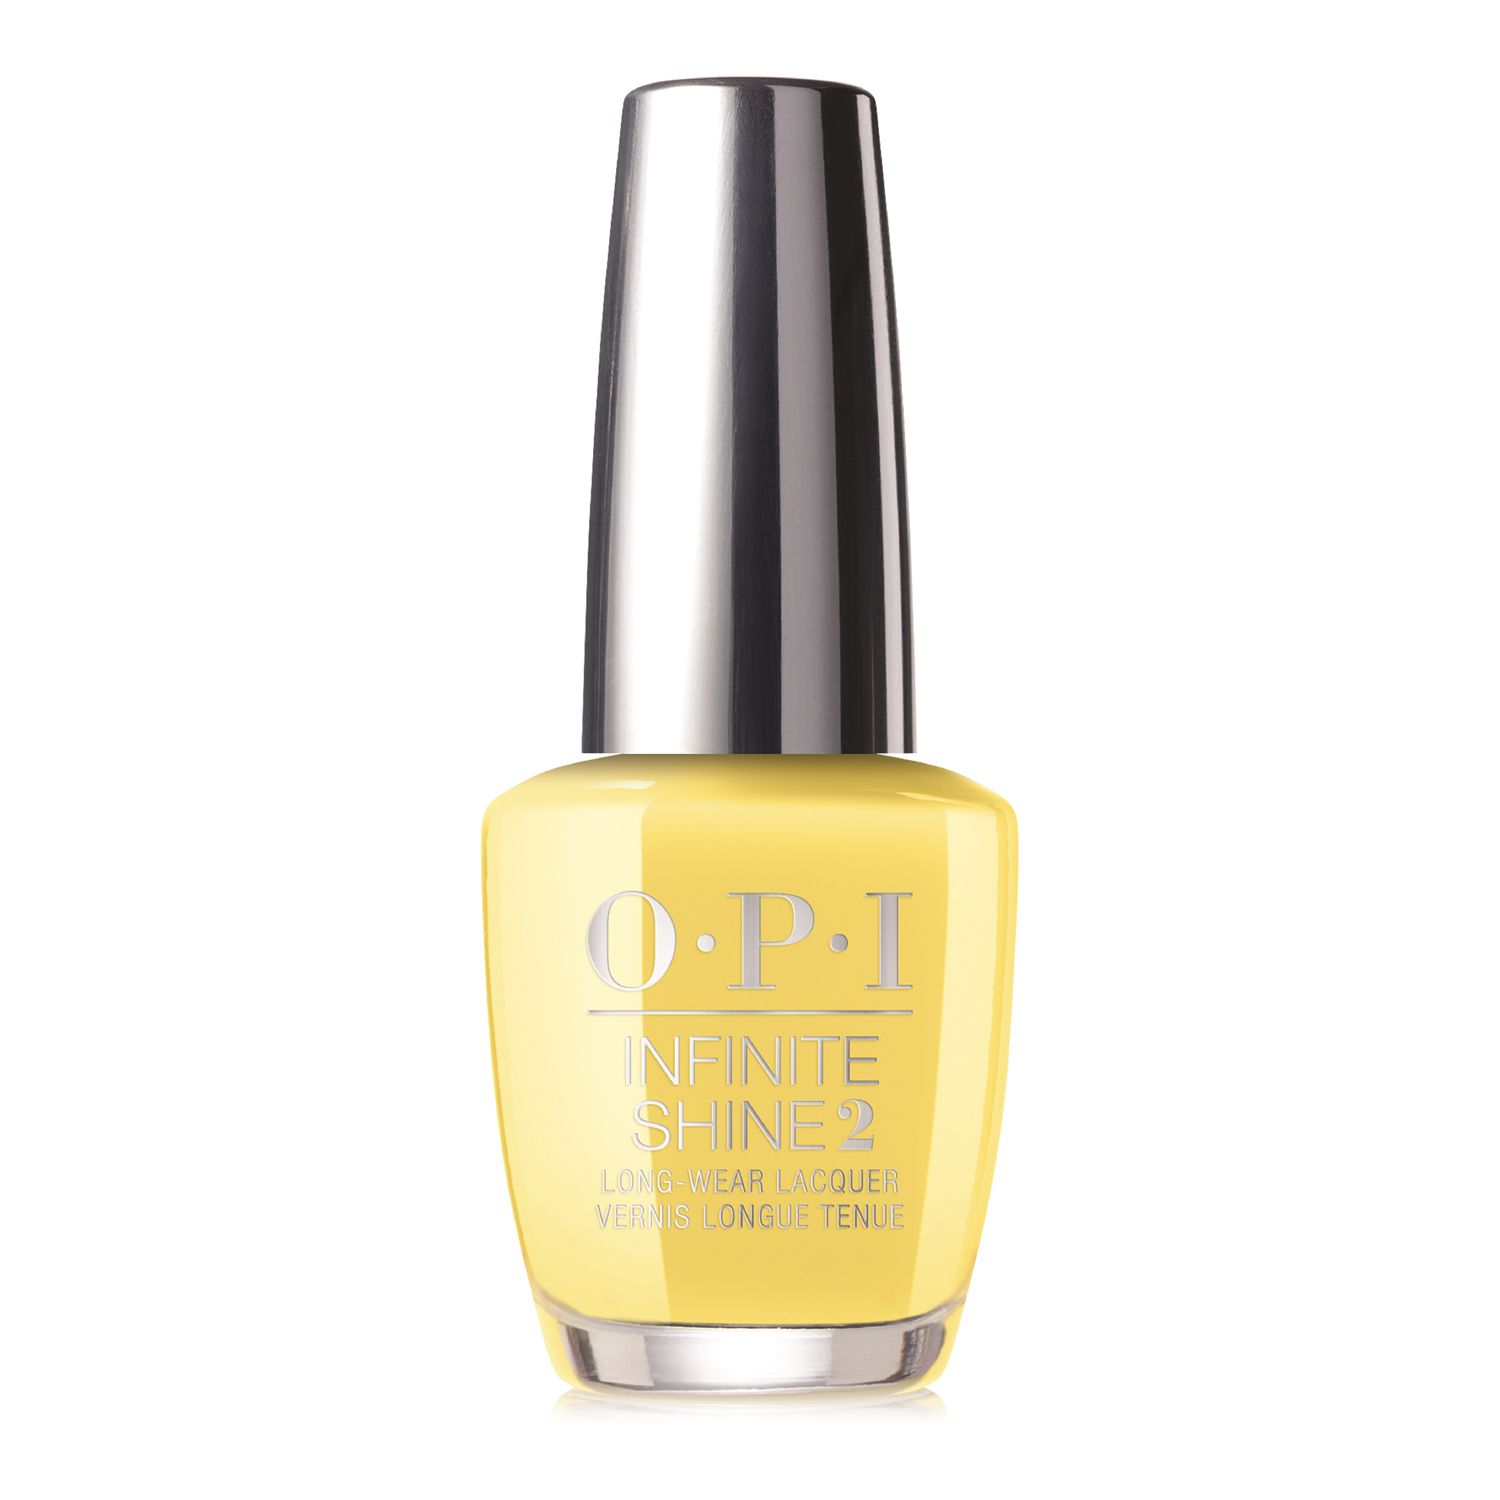 where to find opi nail polish